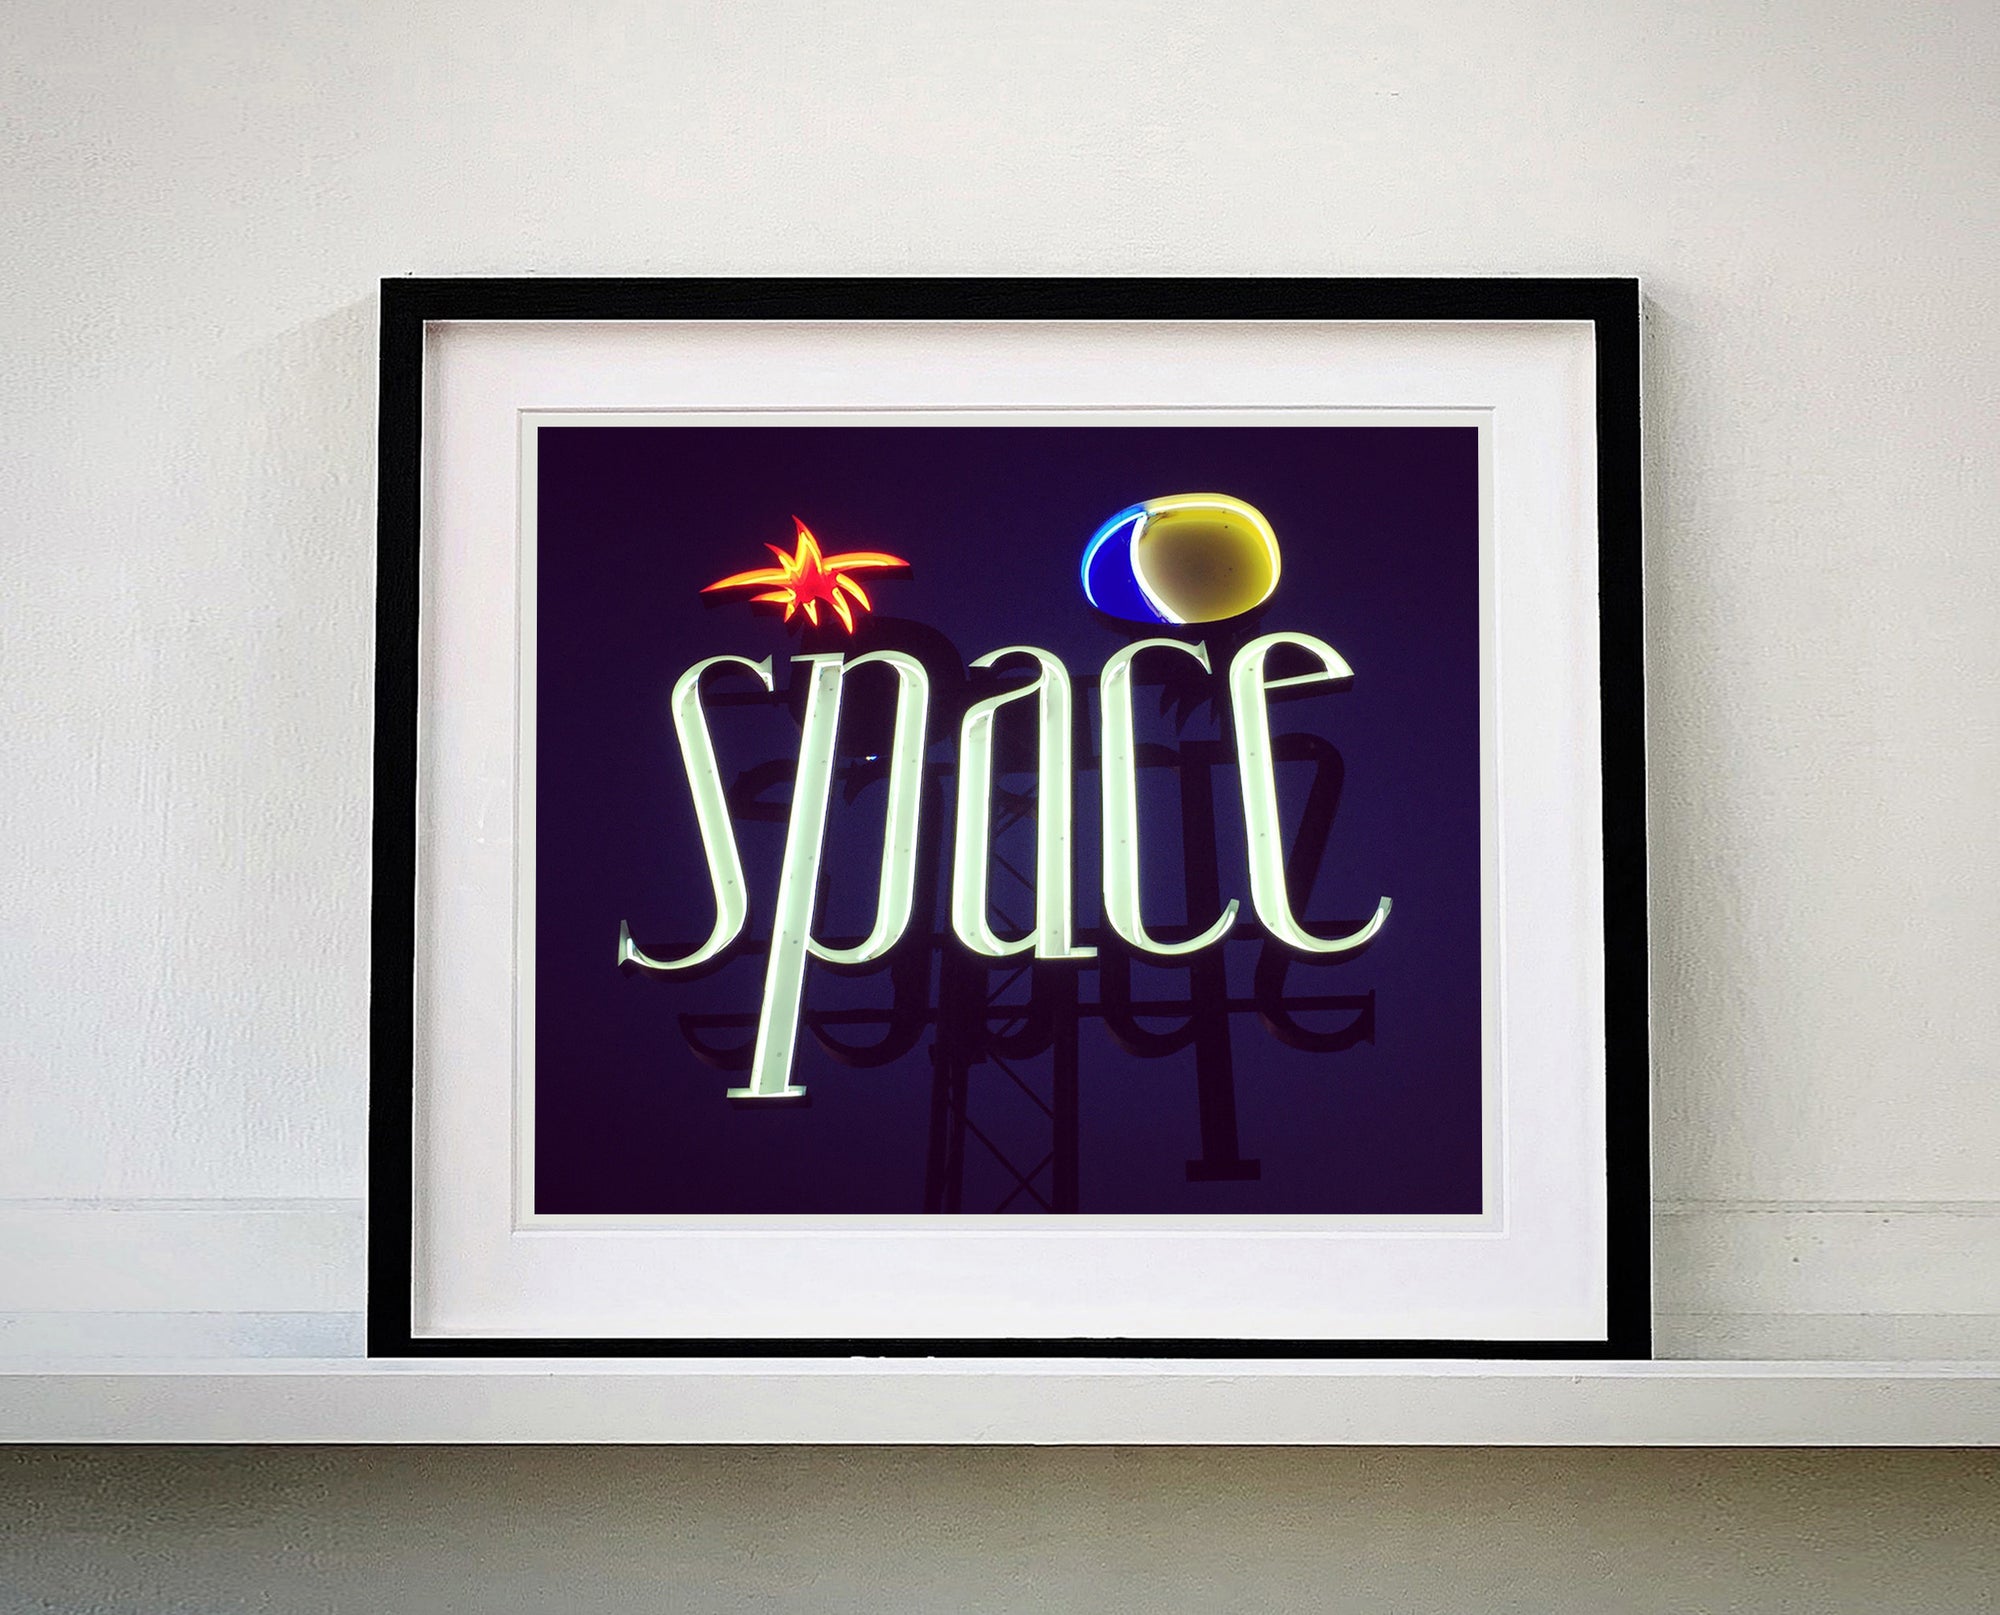 'Space', features neon lettering against an inky blue sky. The subject is a roadside sign taken in Ibiza during the final year of the iconic super club 'Space'. 